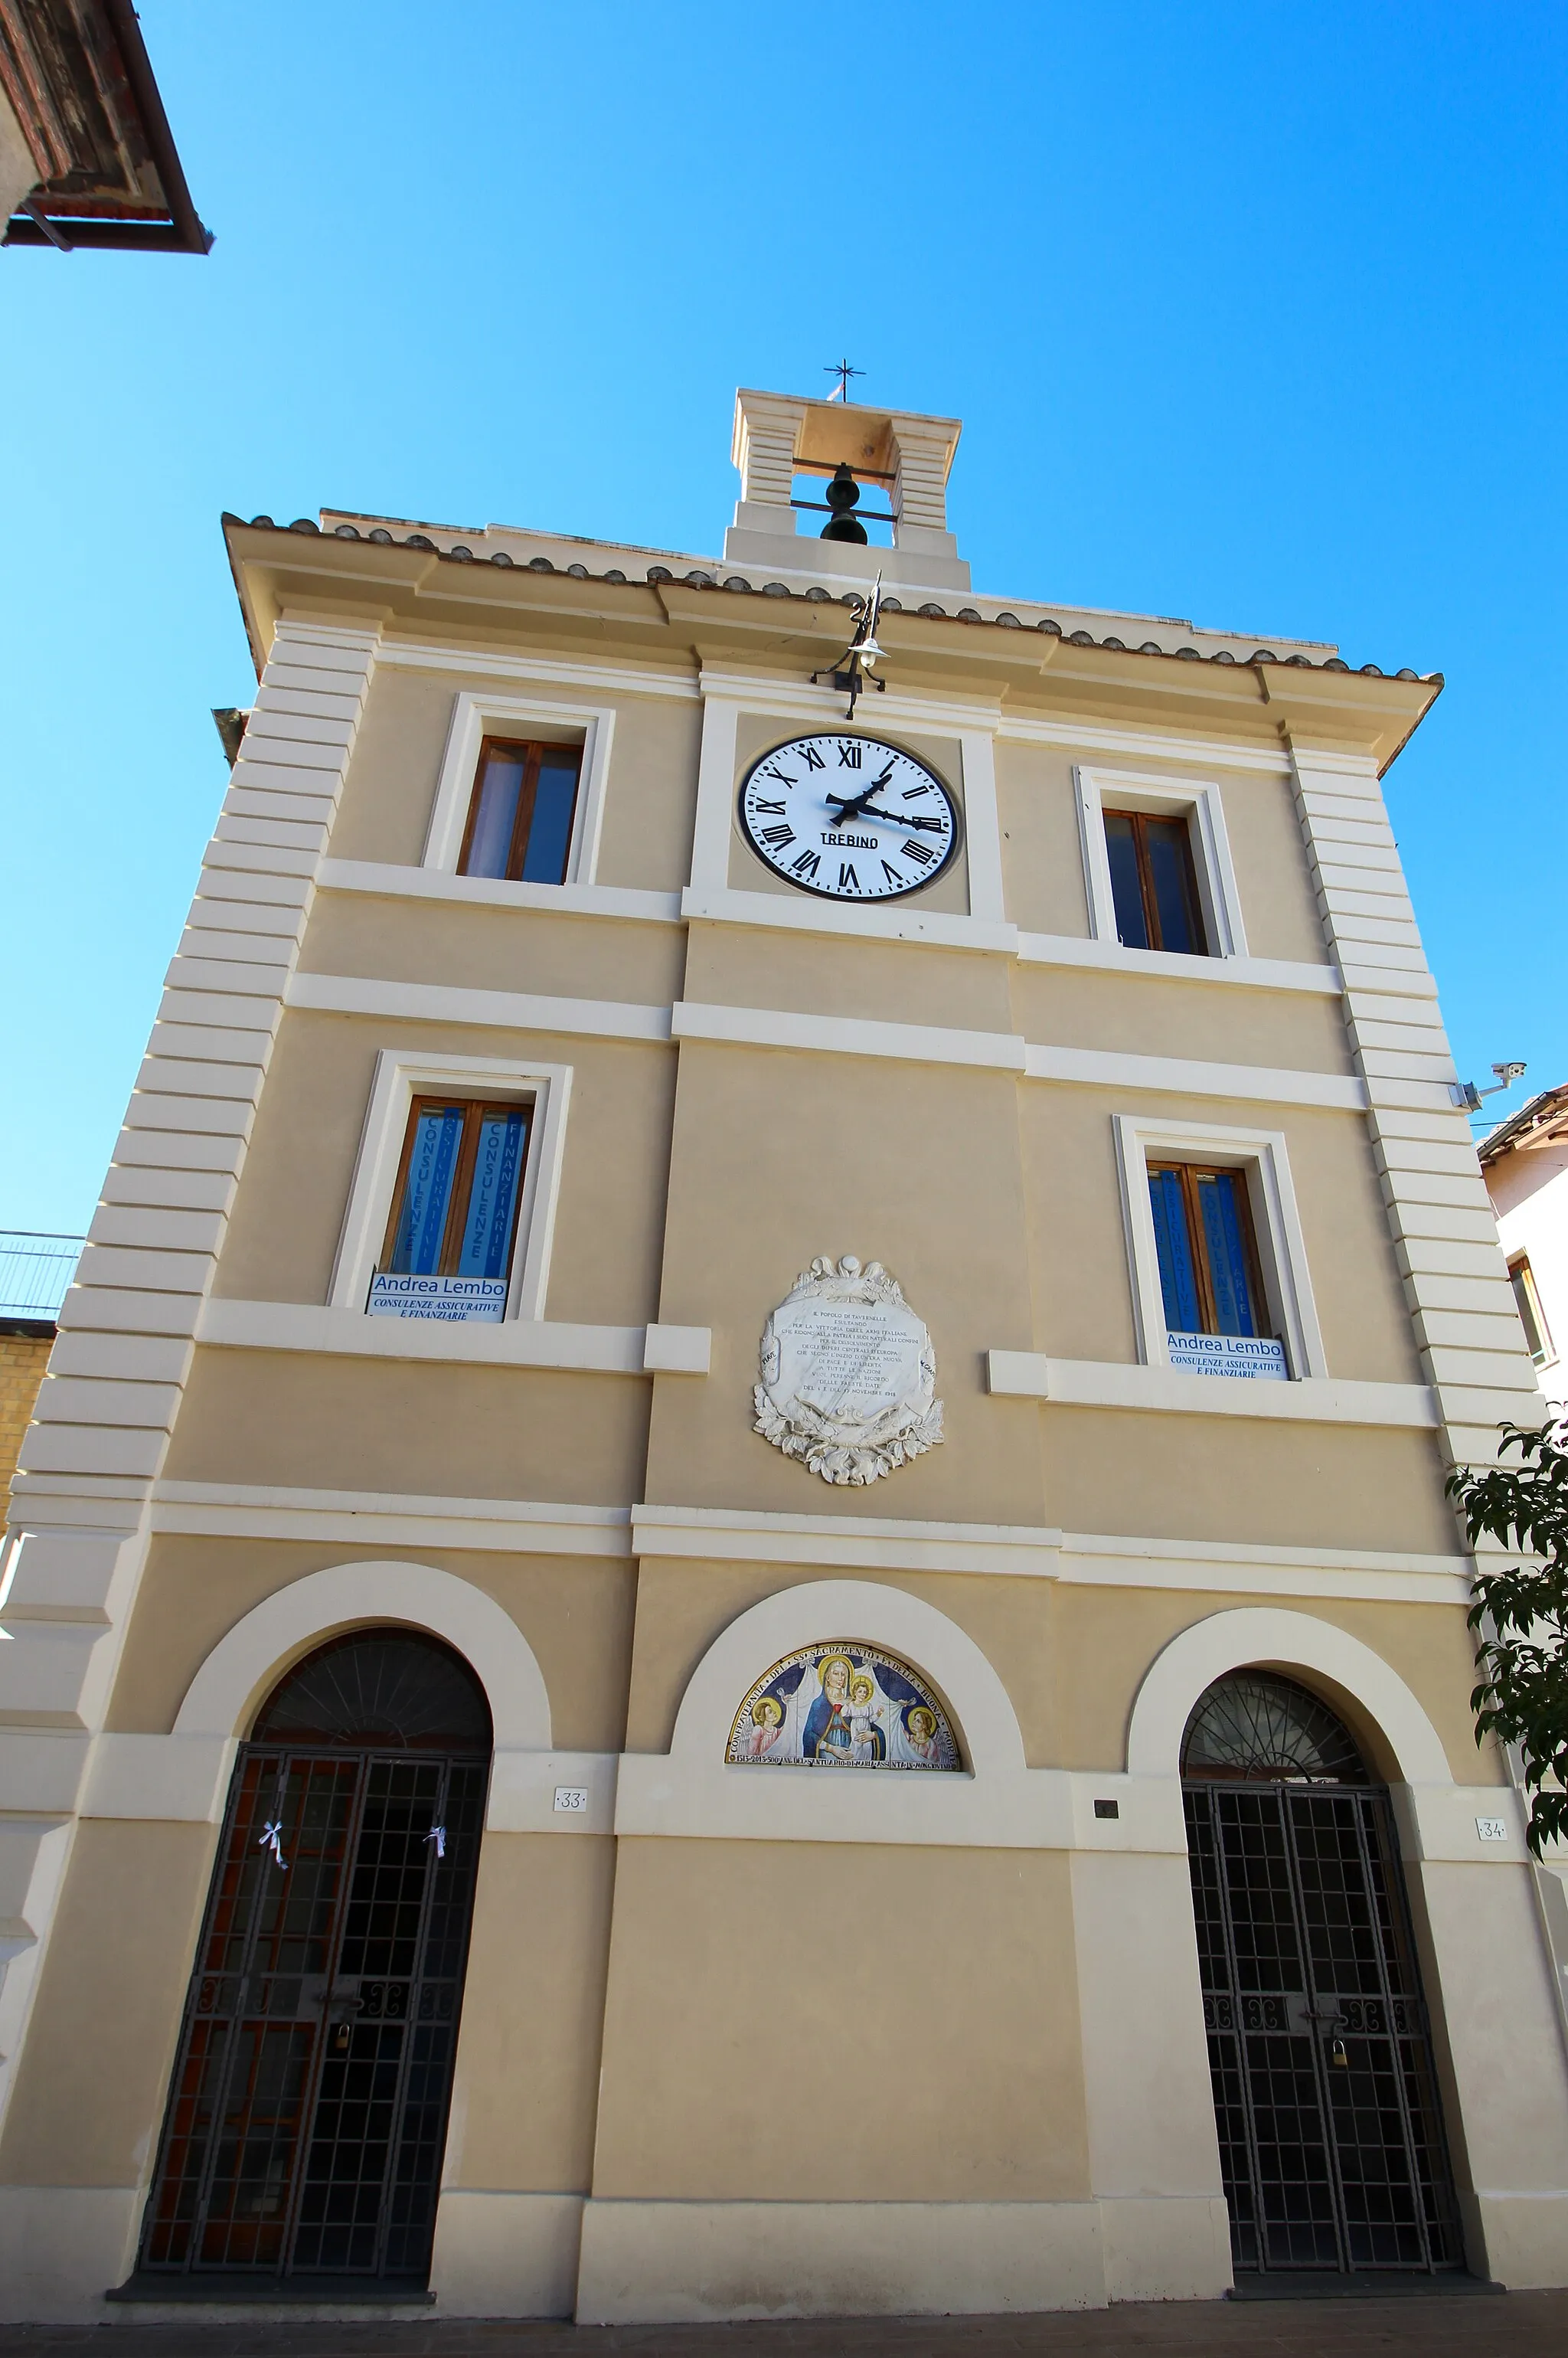 Photo showing: Palace Palazzo dell'Orologio, Tavernelle, hamlet of Panicale, Province of Perugia, Umbria, Italy